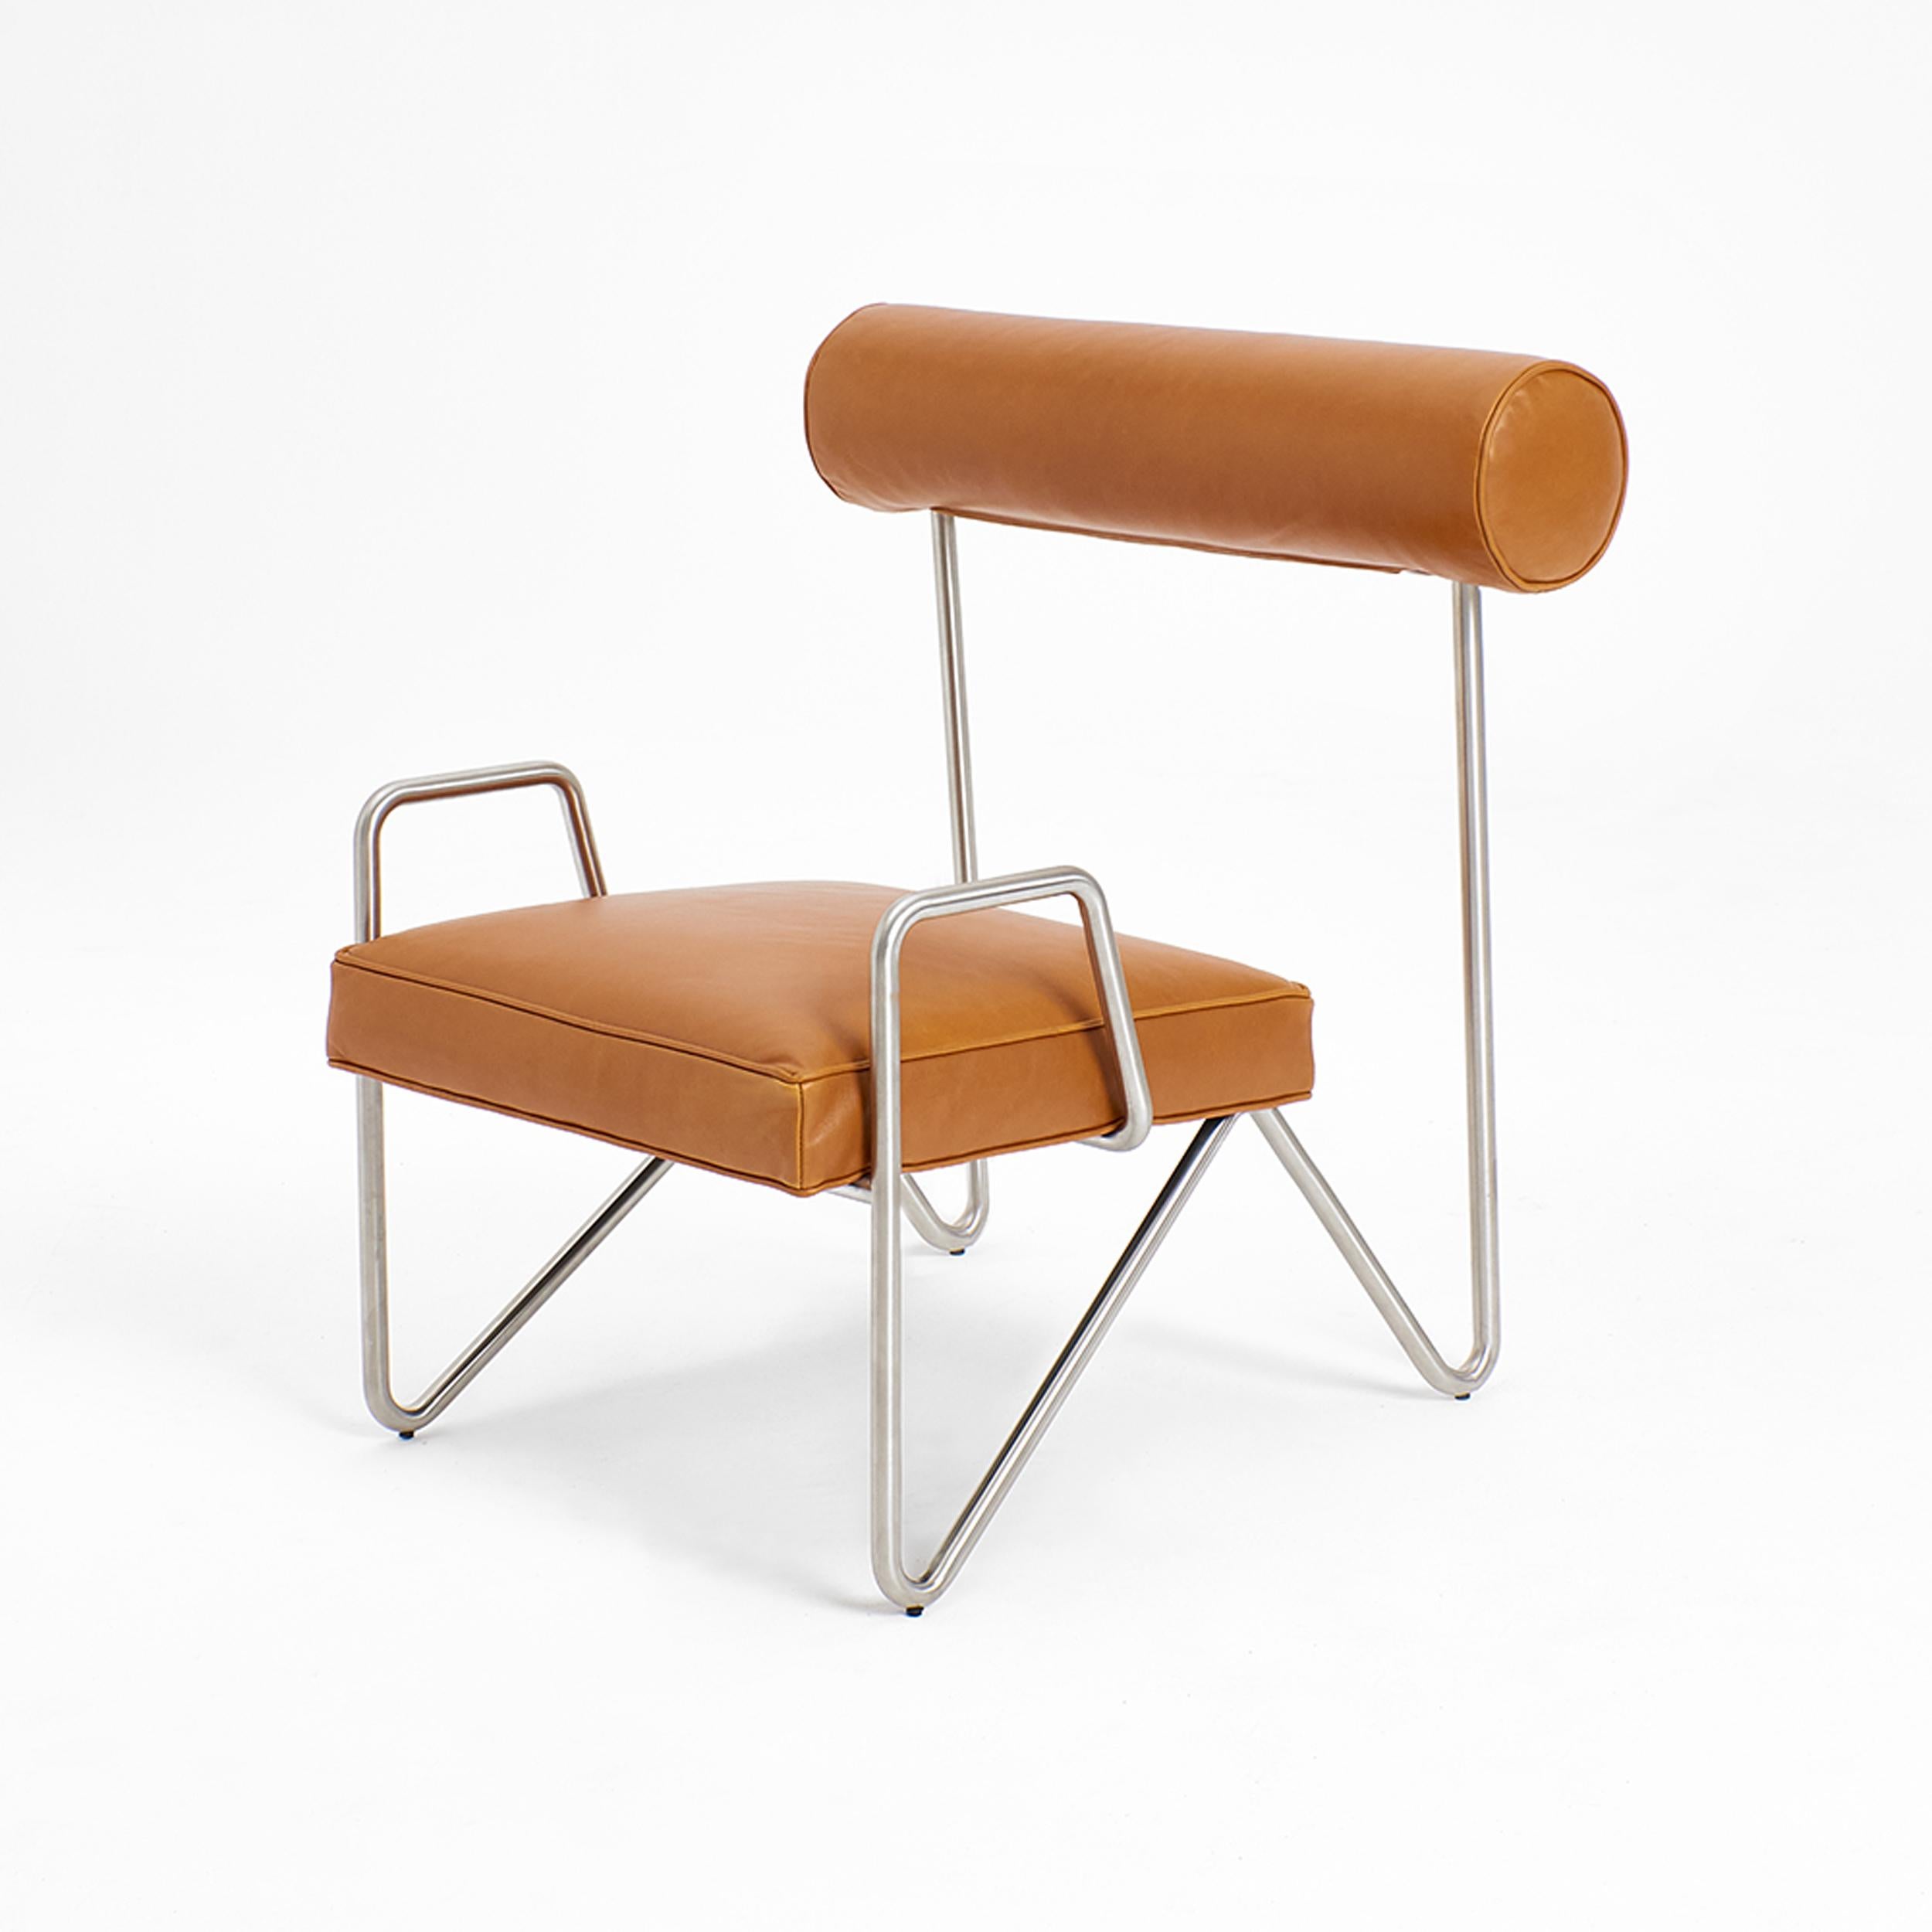 Tan Larry's Lounge Chair by Project 213A
Dimensions: W 56 x D 67 x H 82 cm
Materials: Leather, metal.

Simple yet ingenious, a continuous metal frame bent and shaped to form the base for a rich leather seat.

Project 213A is a European design